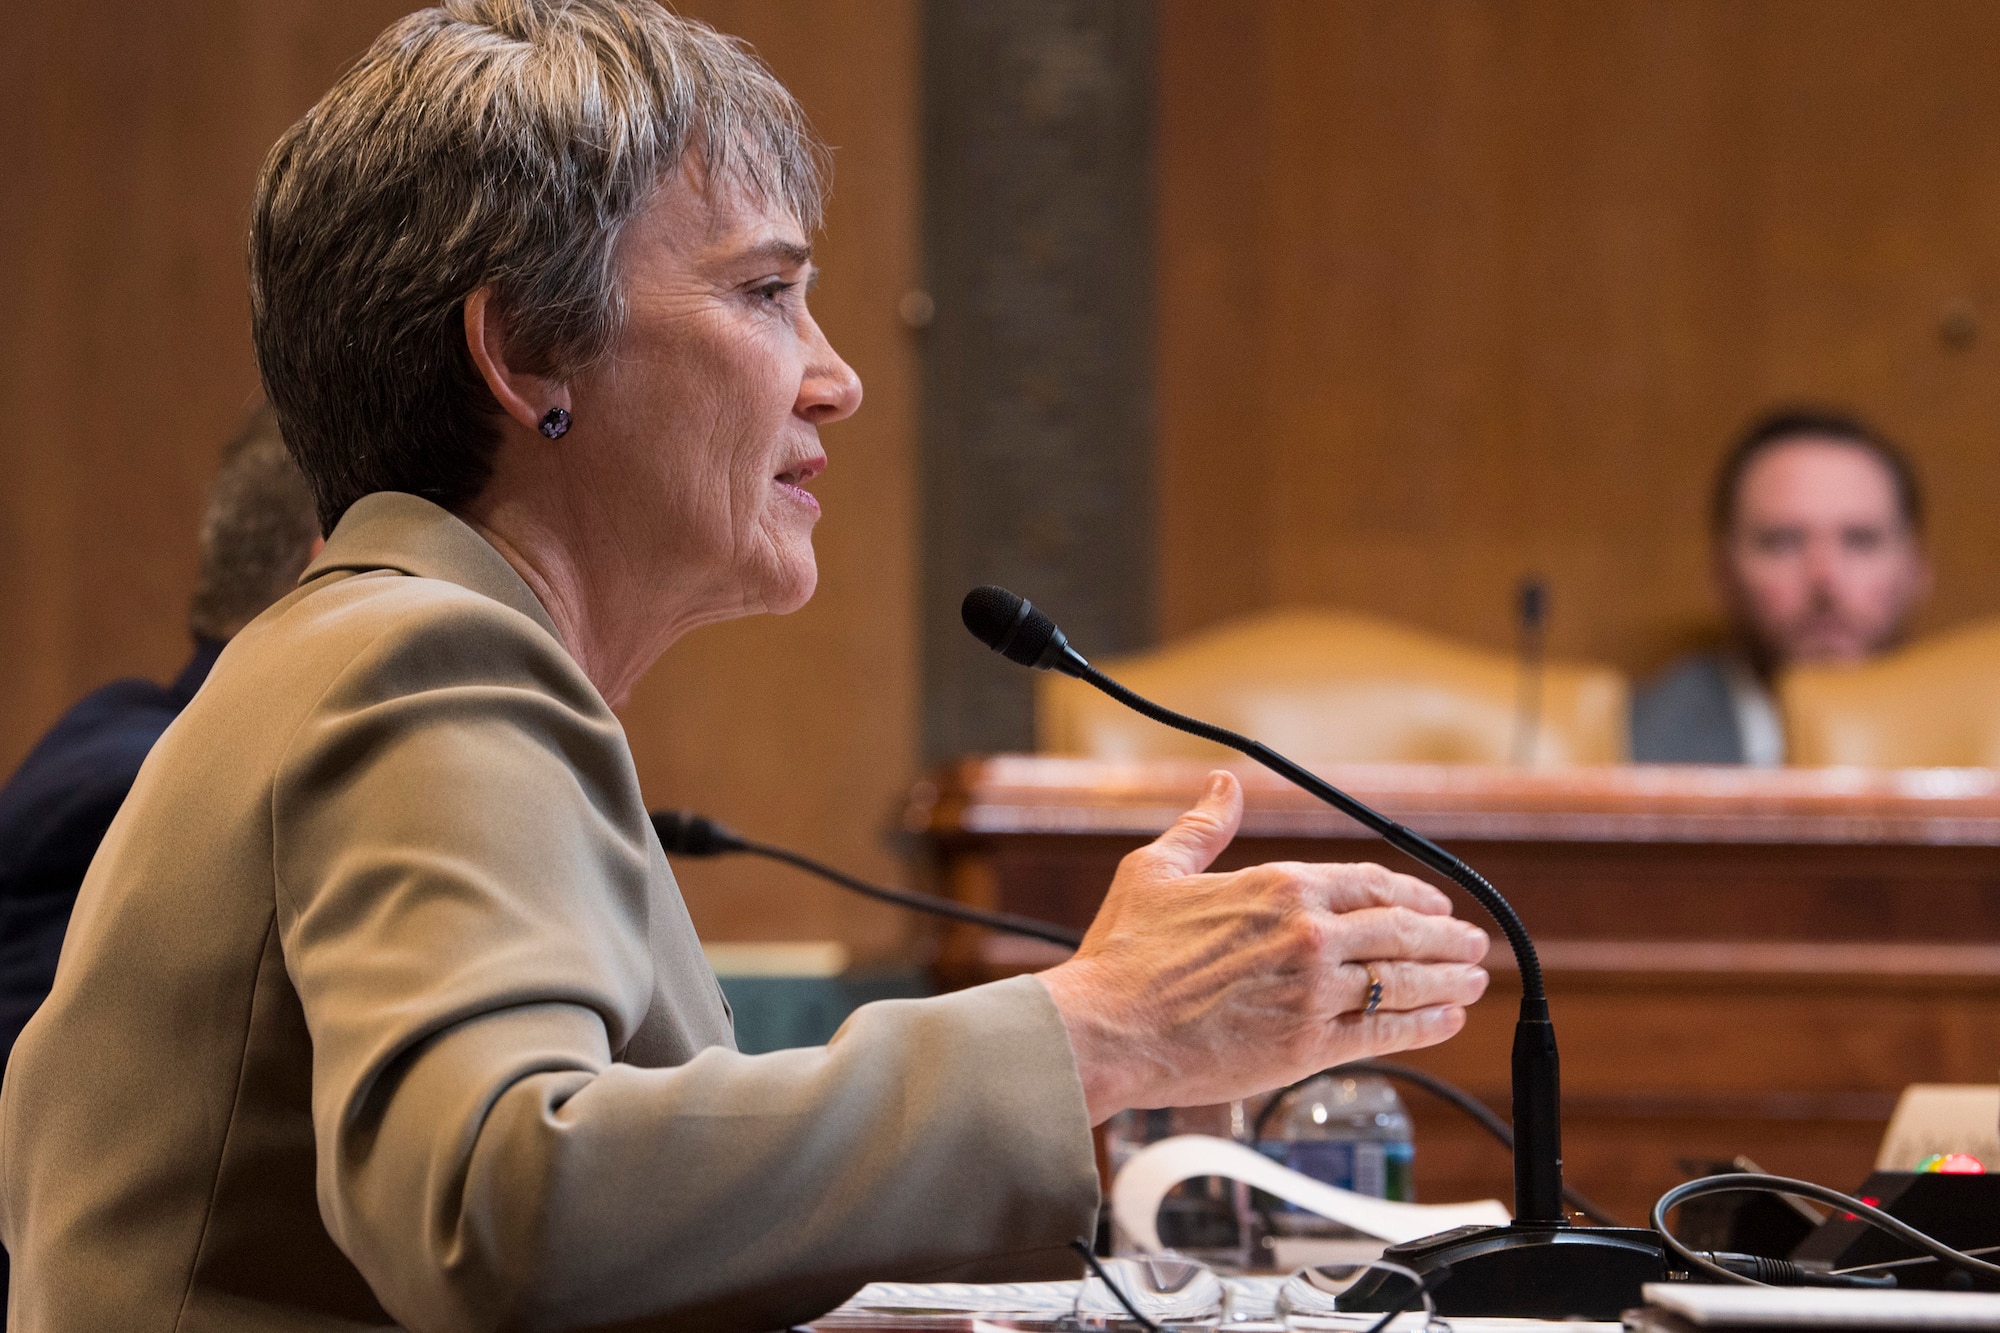 Secretary of the Air Force Heather Wilson testifies during a Senate Appropriations Committee hearing on the fiscal year 2020 funding request and budget justification for the Department of the Air Force in Washington, D.C., March 13, 2019. (U.S. Air Force photo by Adrian Cadiz)